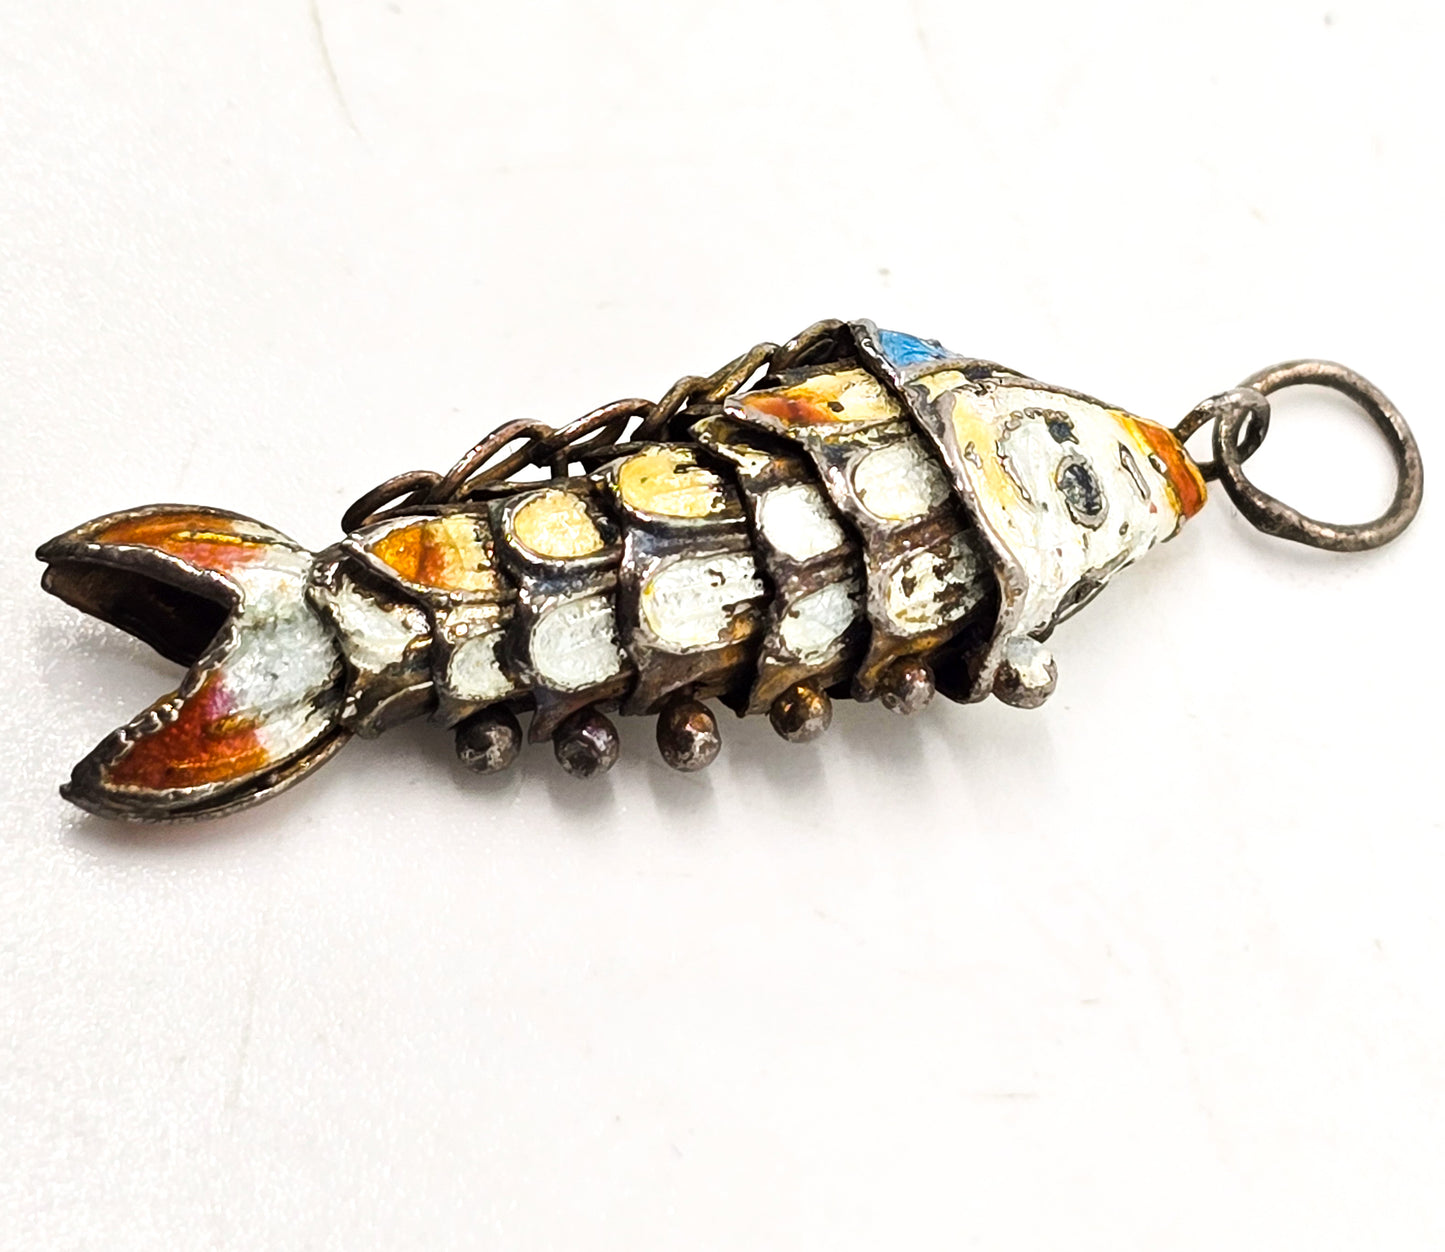 Articulated enamel koi fish Chinese Export vintage moving figural pendant